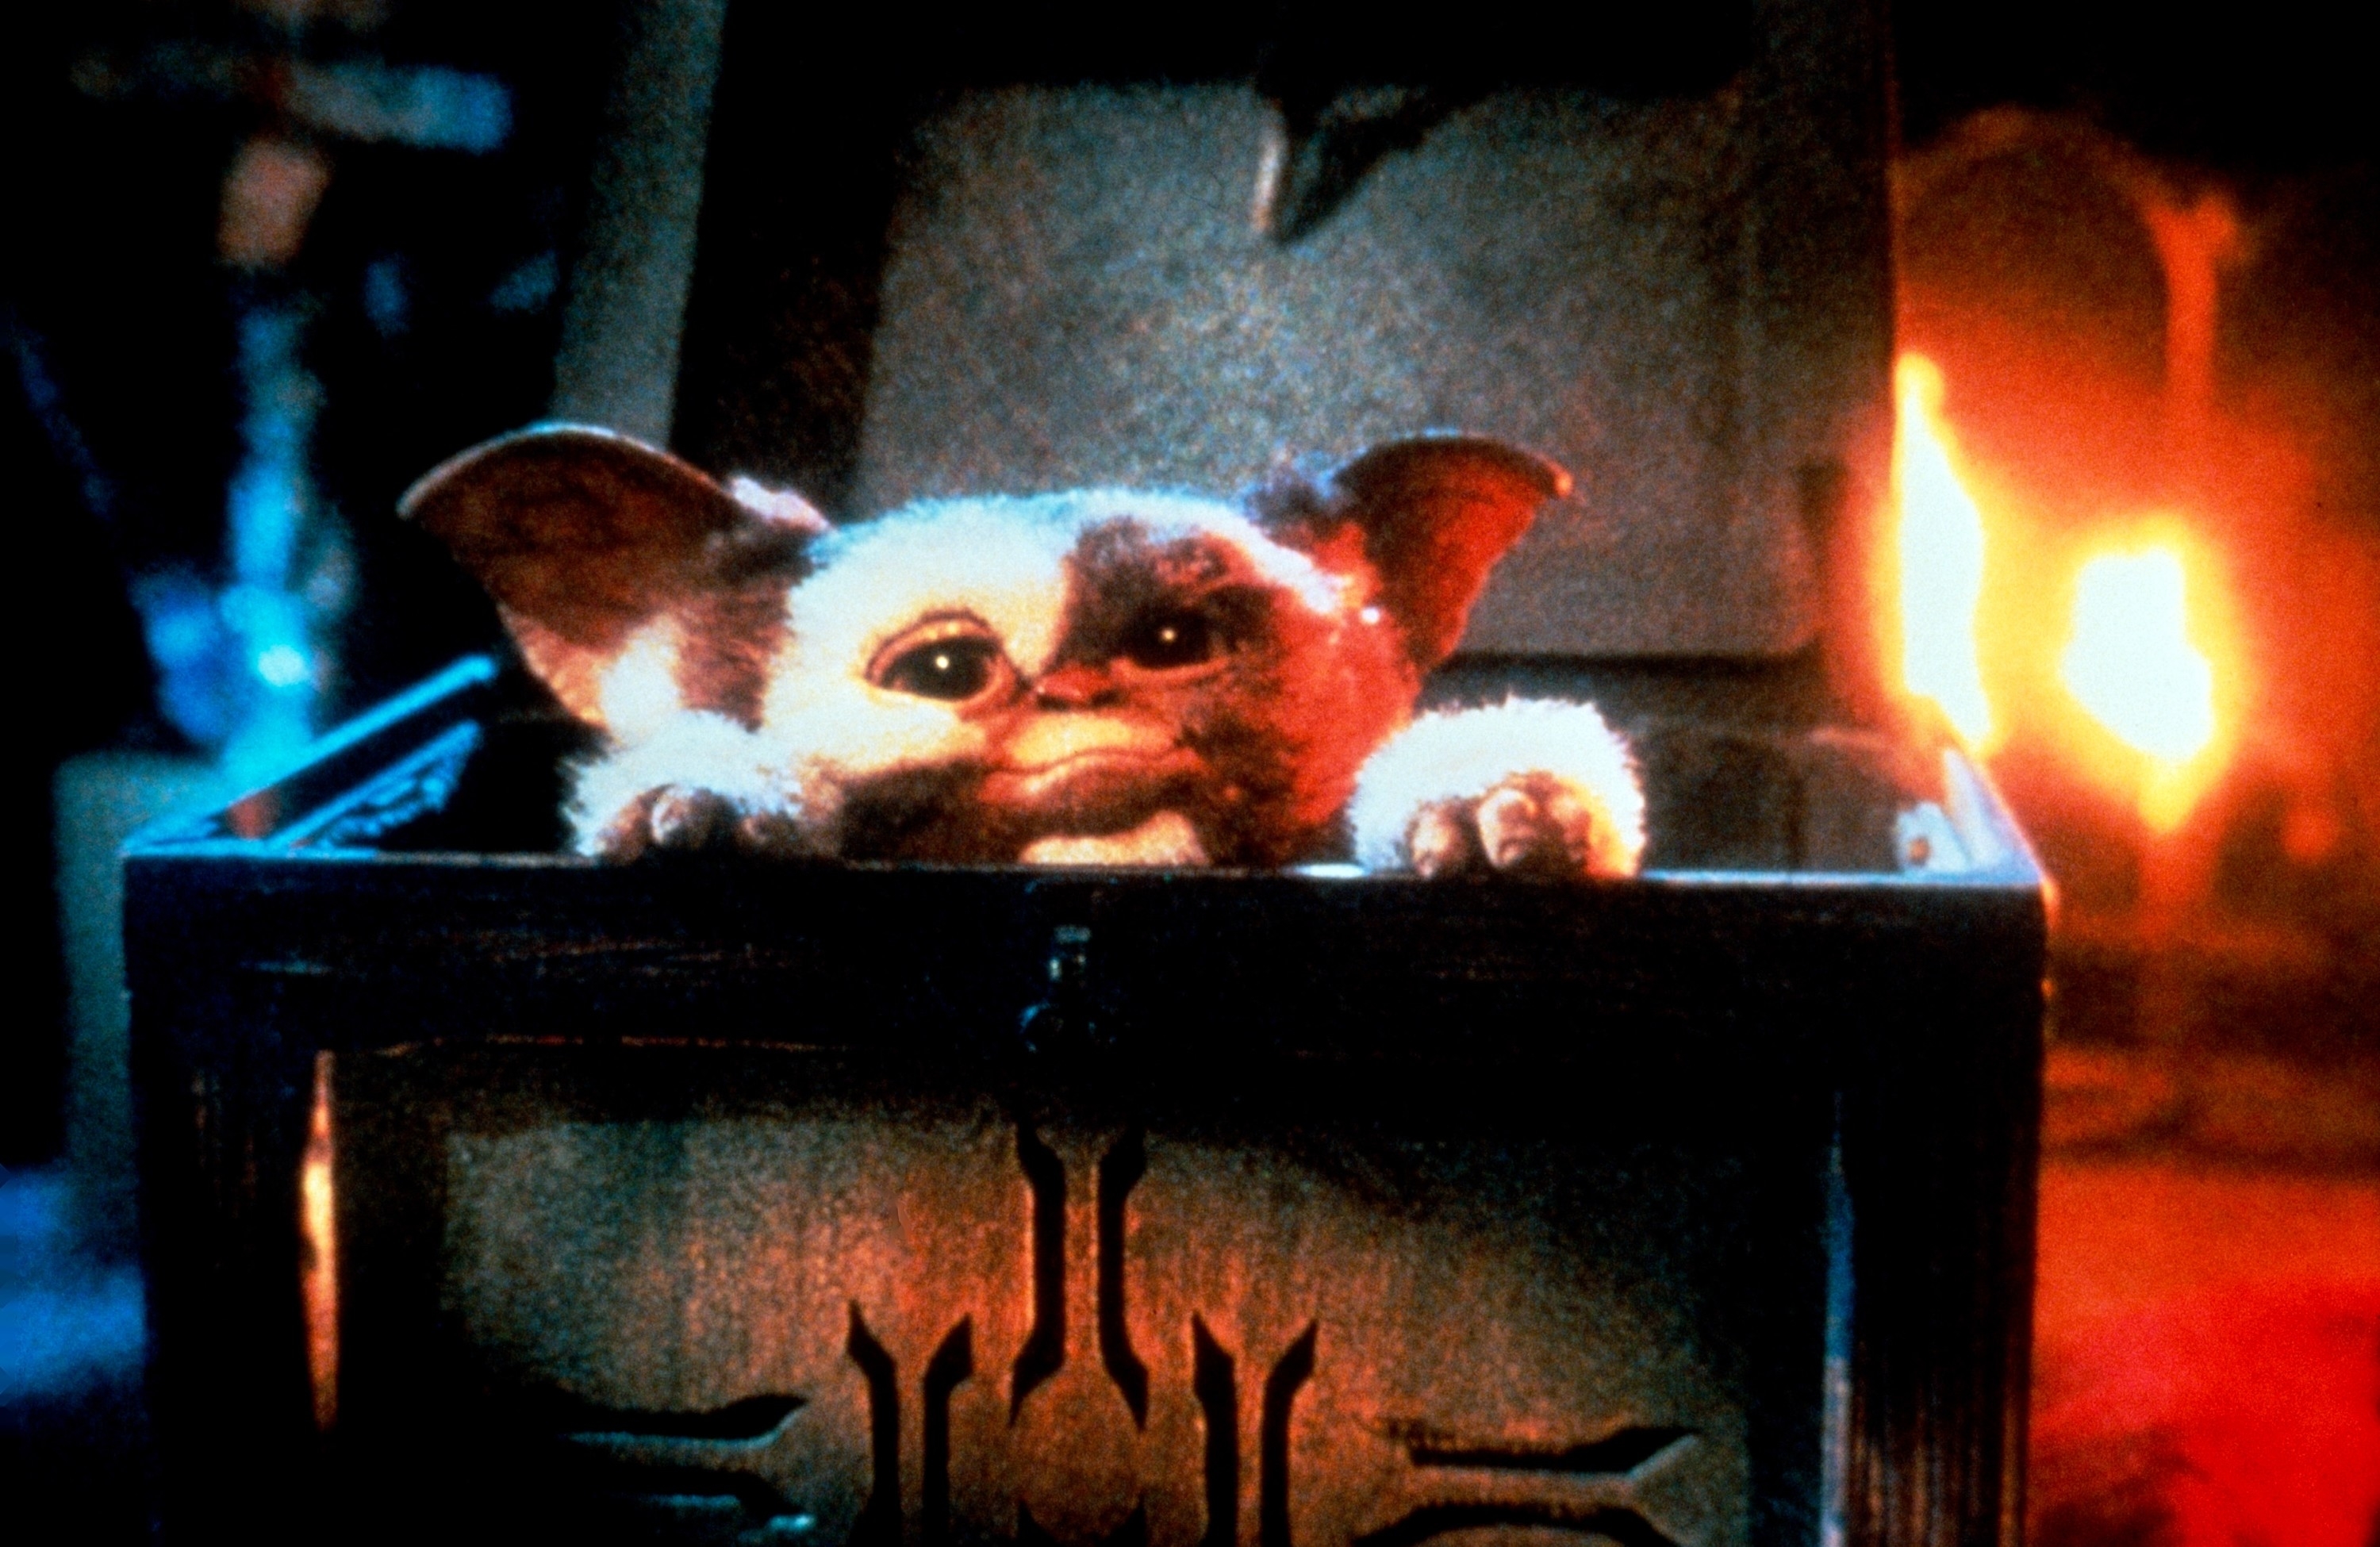 Gizmo the Mogwai peeks out from a box in a scene from the movie &quot;Gremlins.&quot;